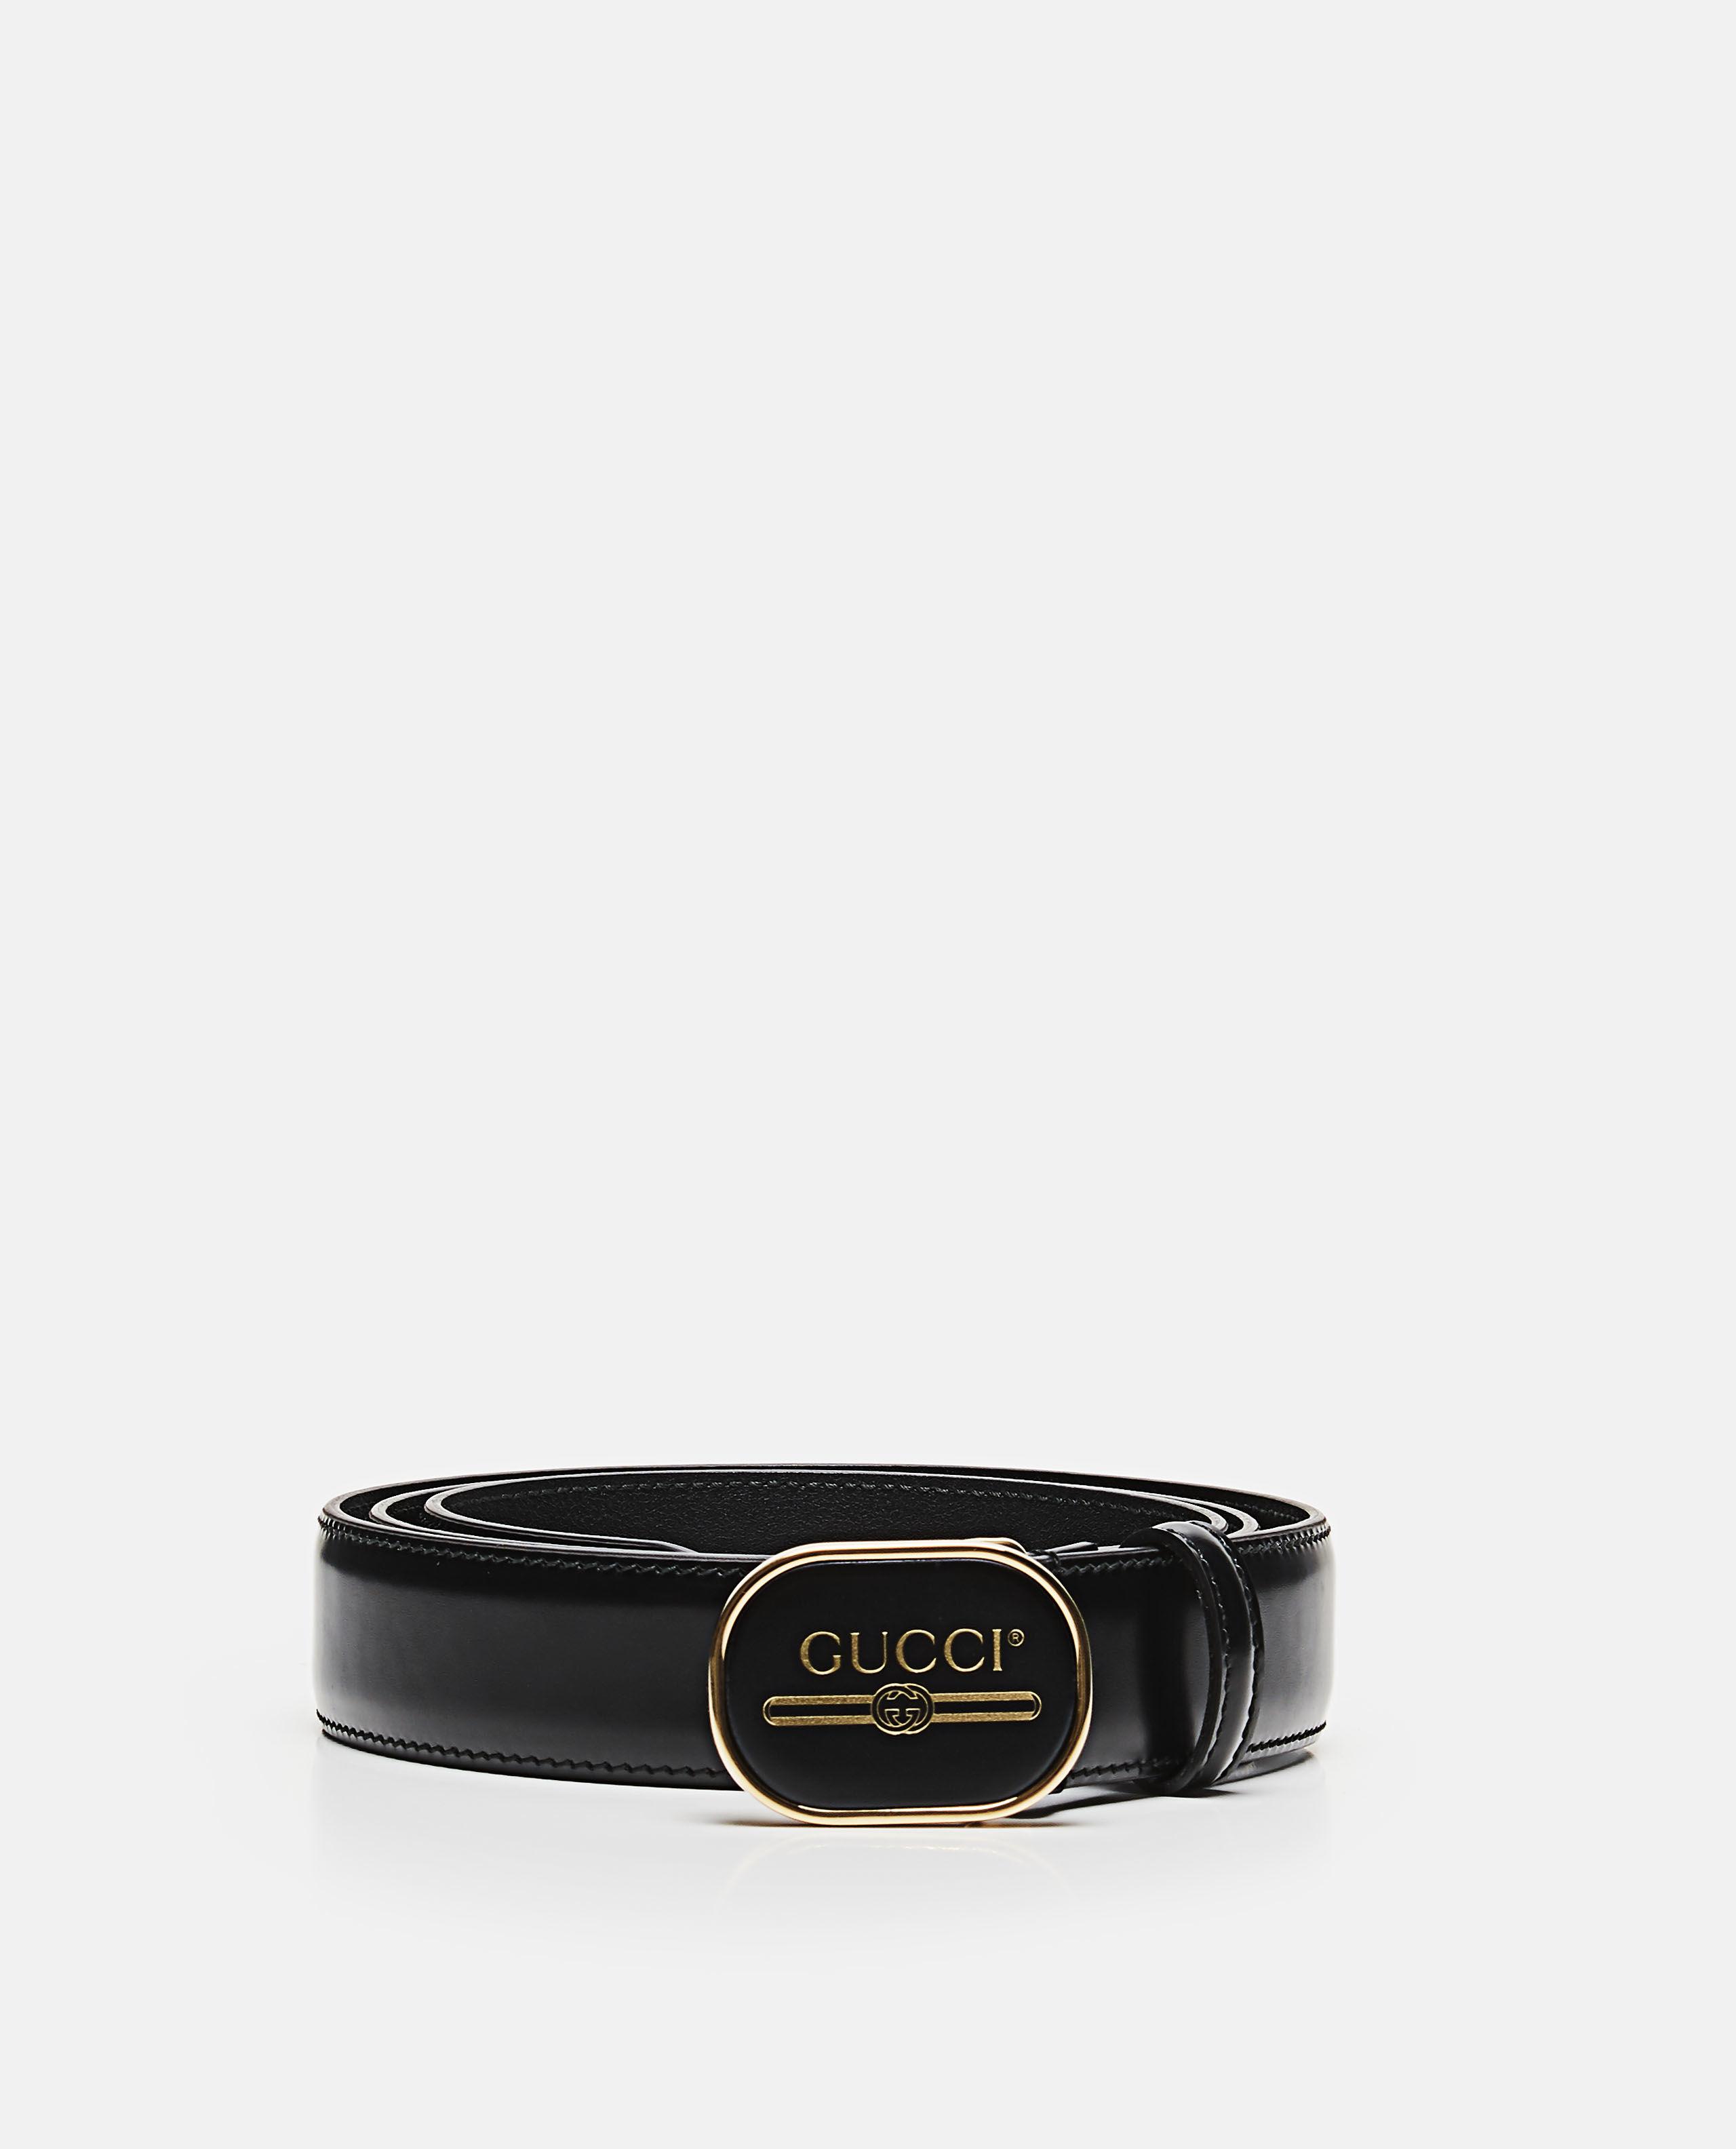 leather belt with gucci print buckle